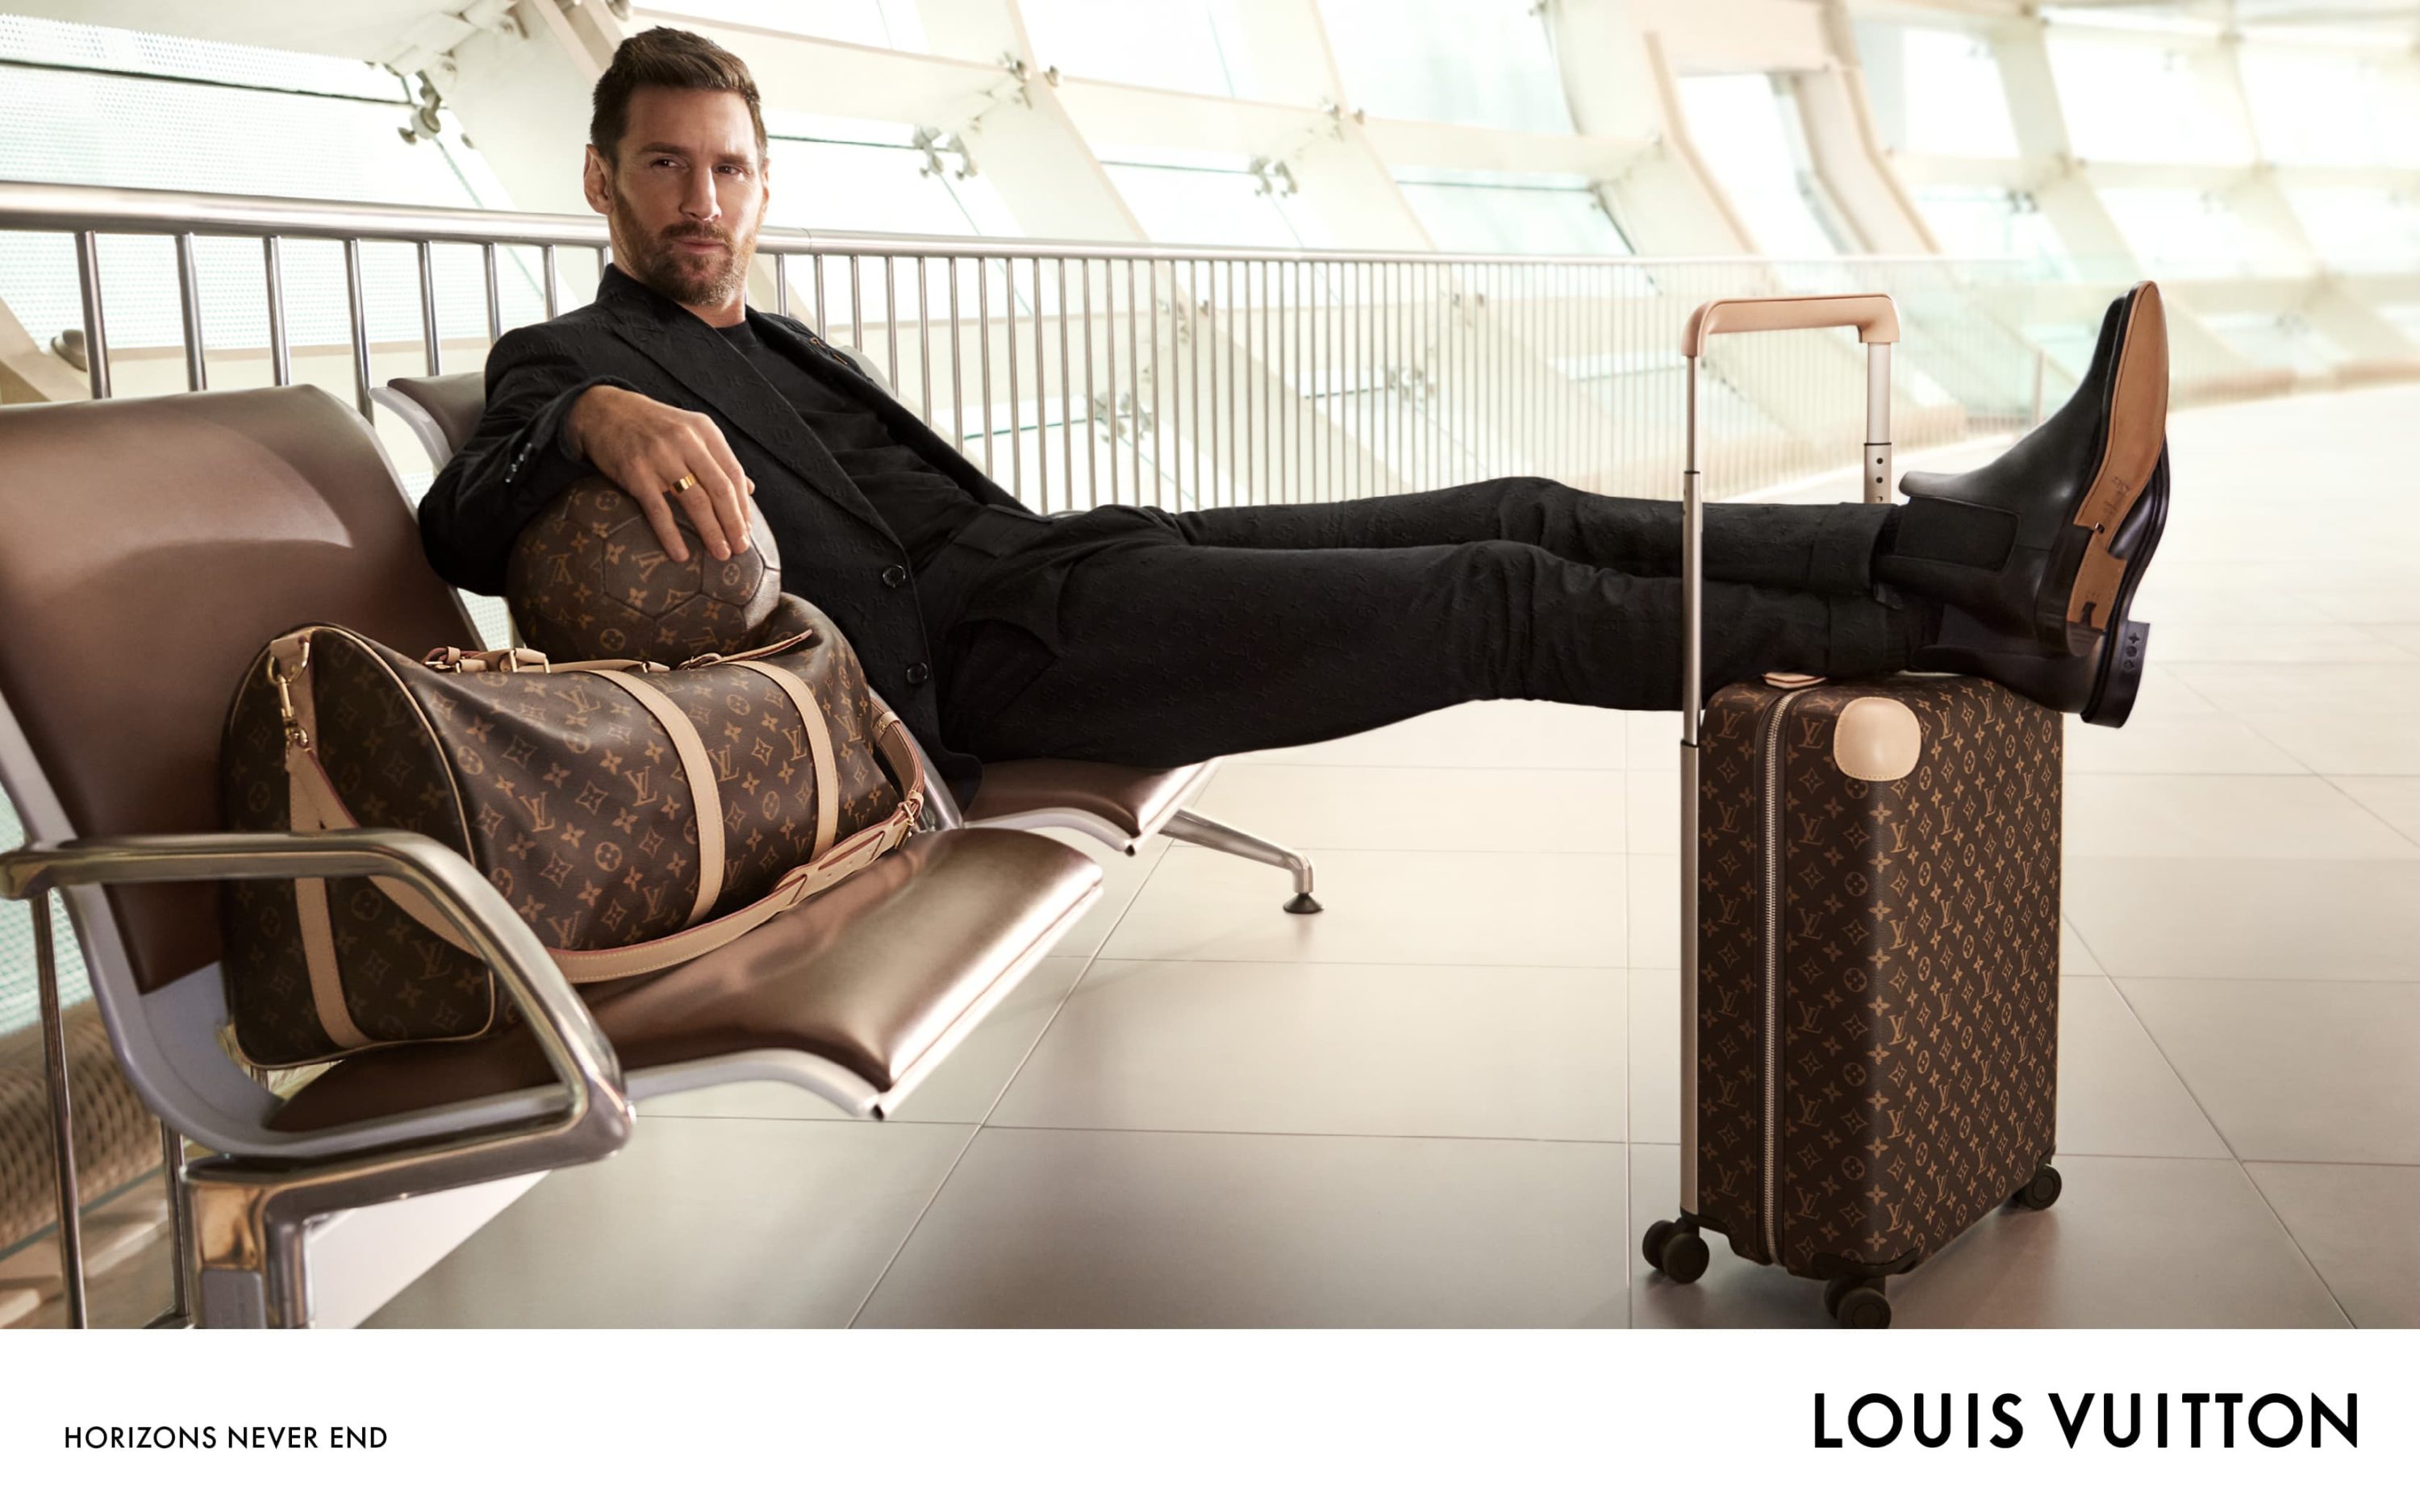 LIONEL MESSI STARS IN THE NEW LOUIS VUITTON “HORIZONS NEVER END” TRAVEL  CAMPAIGN - Numéro Netherlands